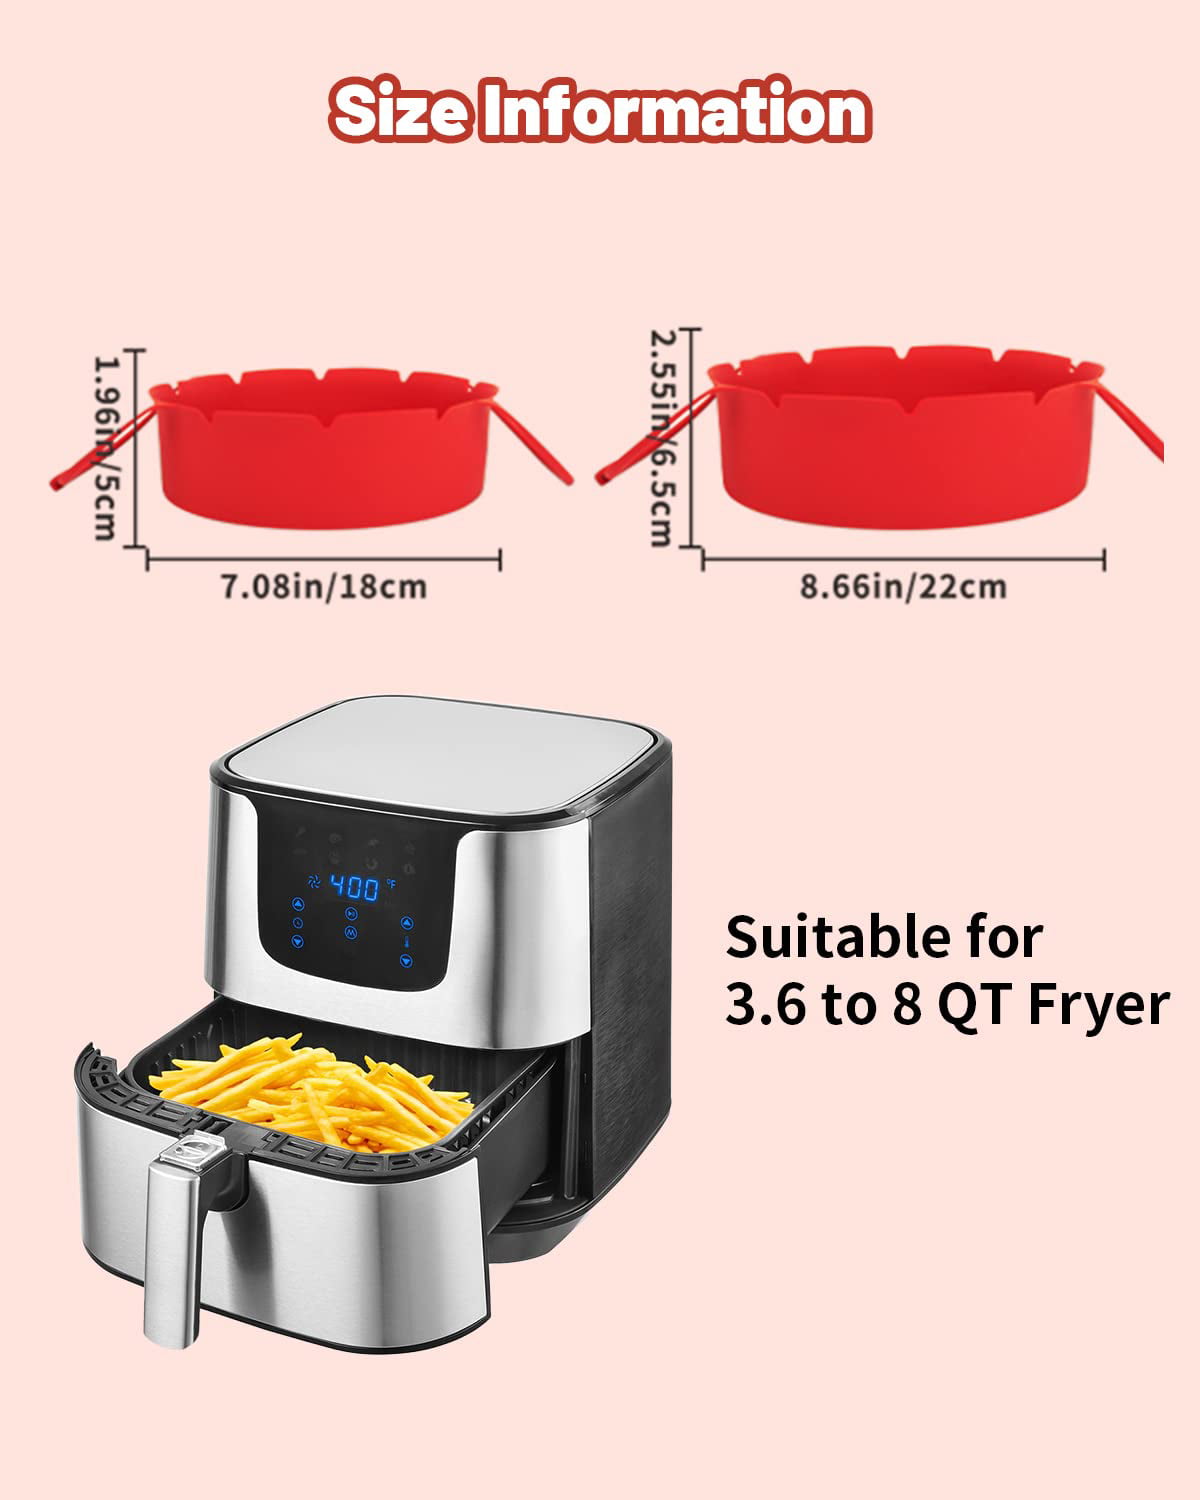 Set of 2 Air Fryer Silicone Liners, Weenkilly Fold-able Square Silicone Air Fryer Liners, 8.0” Thickened Reusable Air Fryer Silicone Liners for 4-7